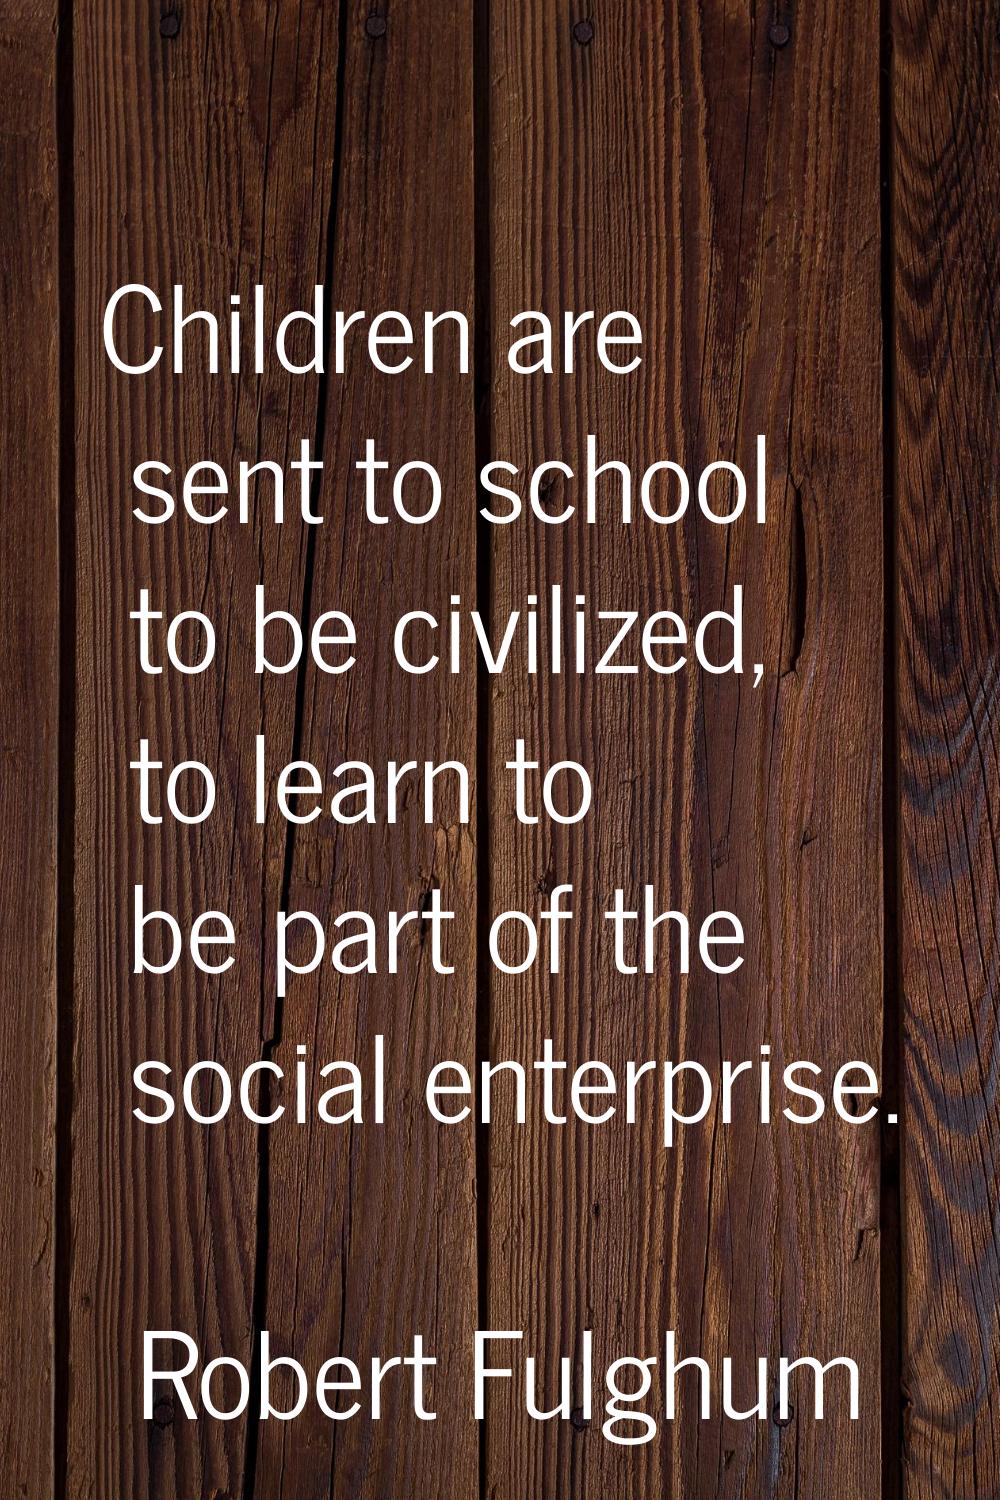 Children are sent to school to be civilized, to learn to be part of the social enterprise.